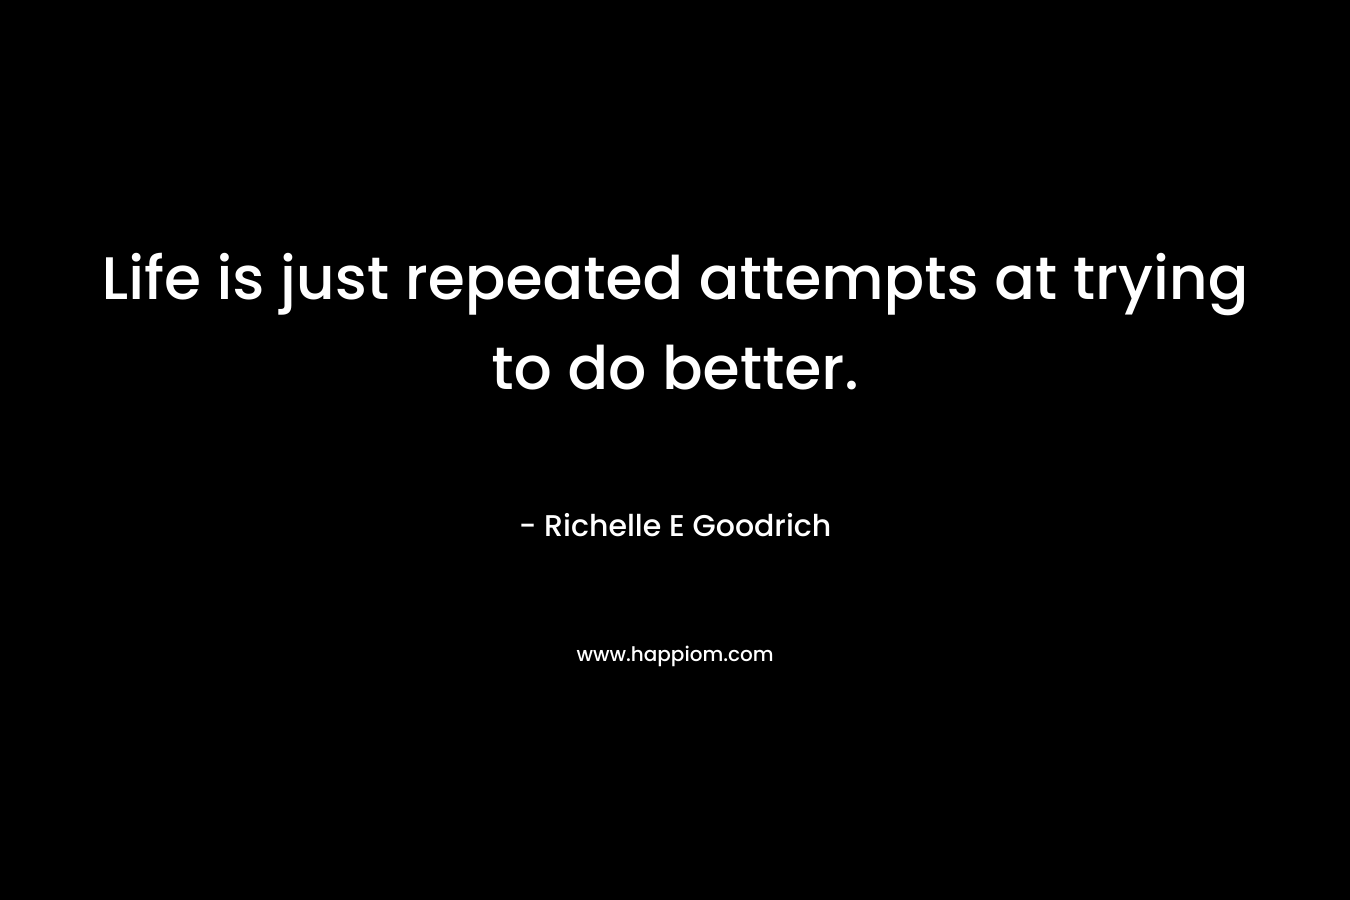 Life is just repeated attempts at trying to do better. – Richelle E Goodrich